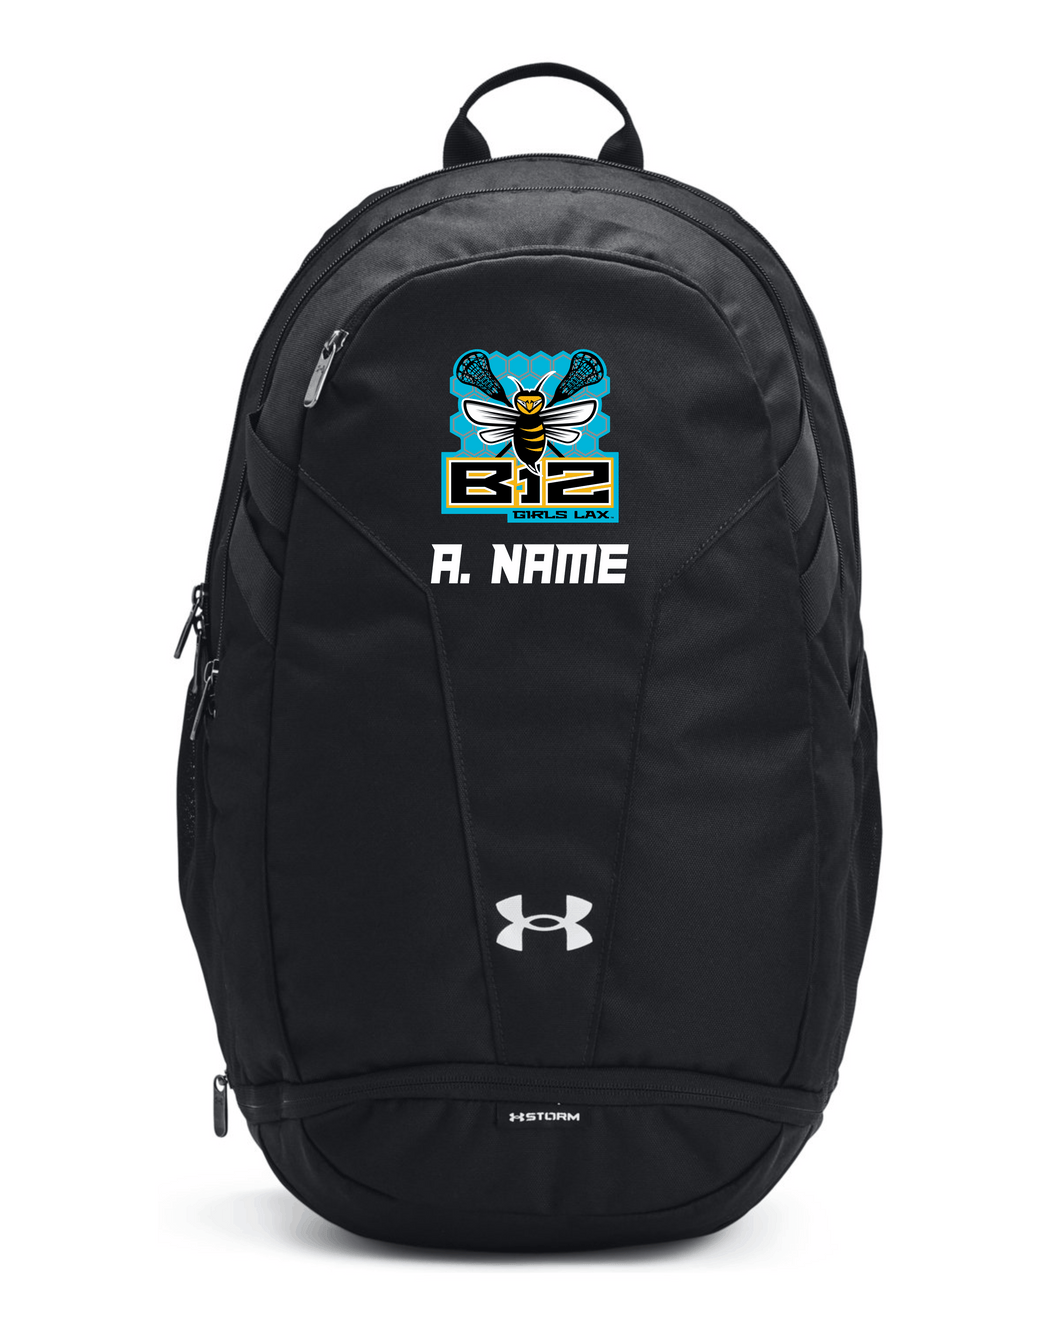 B12-LAX-976-1 - Under Armour Hustle 5.0 Team Backpack - B12 Girls LAX Bee Honeycomb Logo & Personalized Name